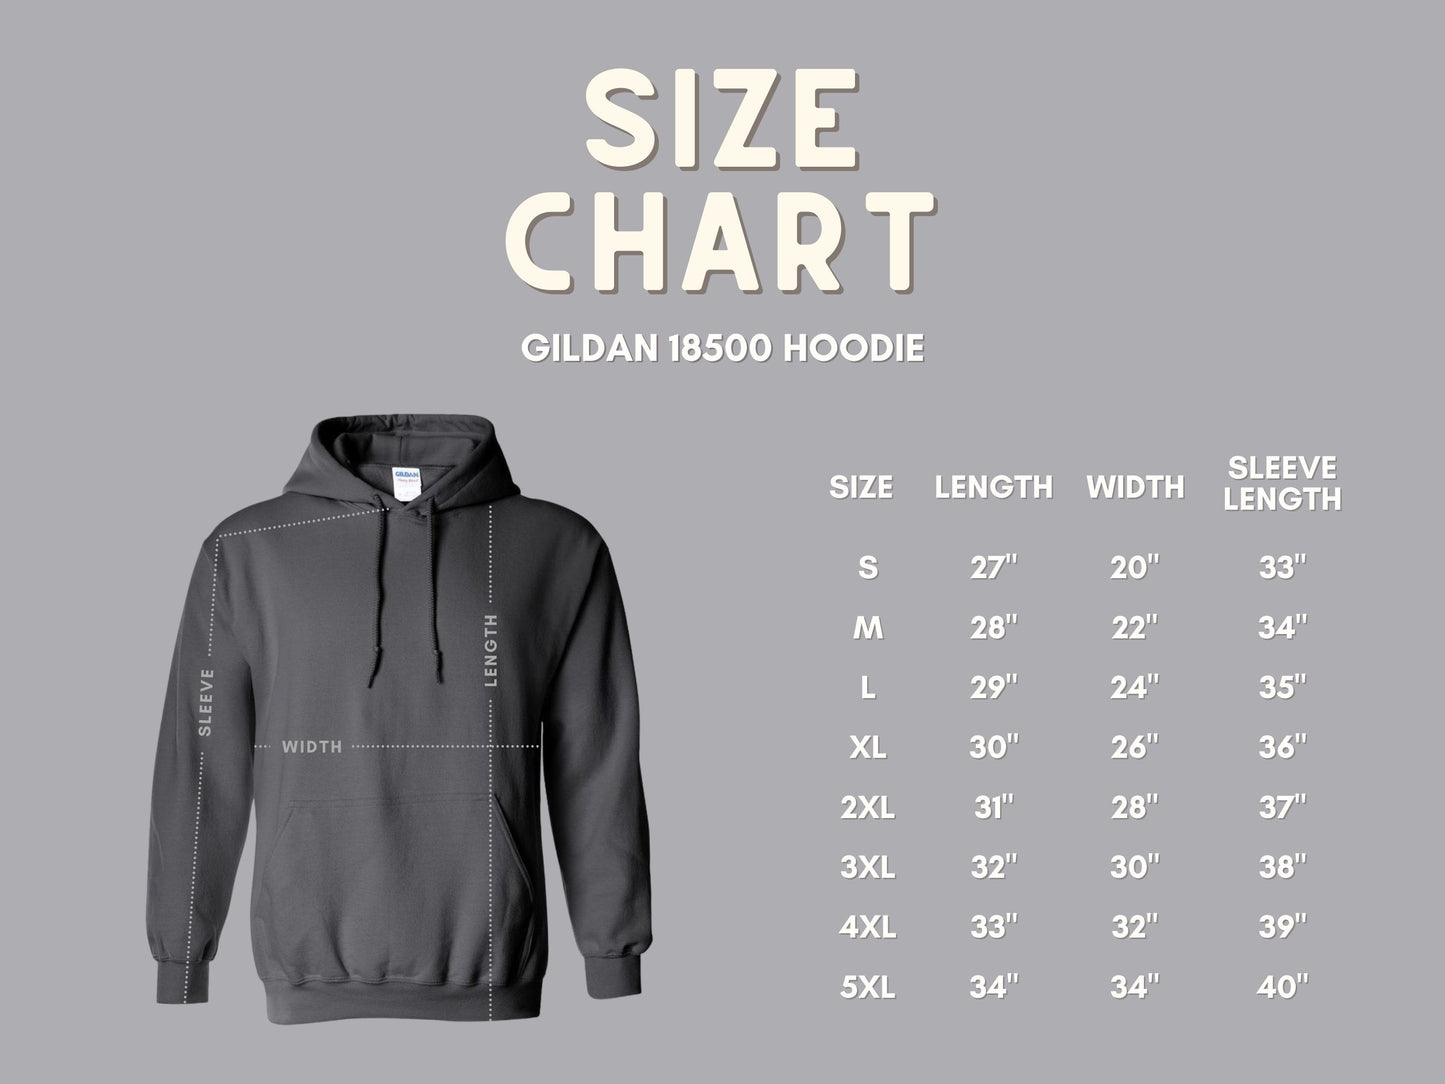 BATCH 62-OTHER MOTHER HOODIE